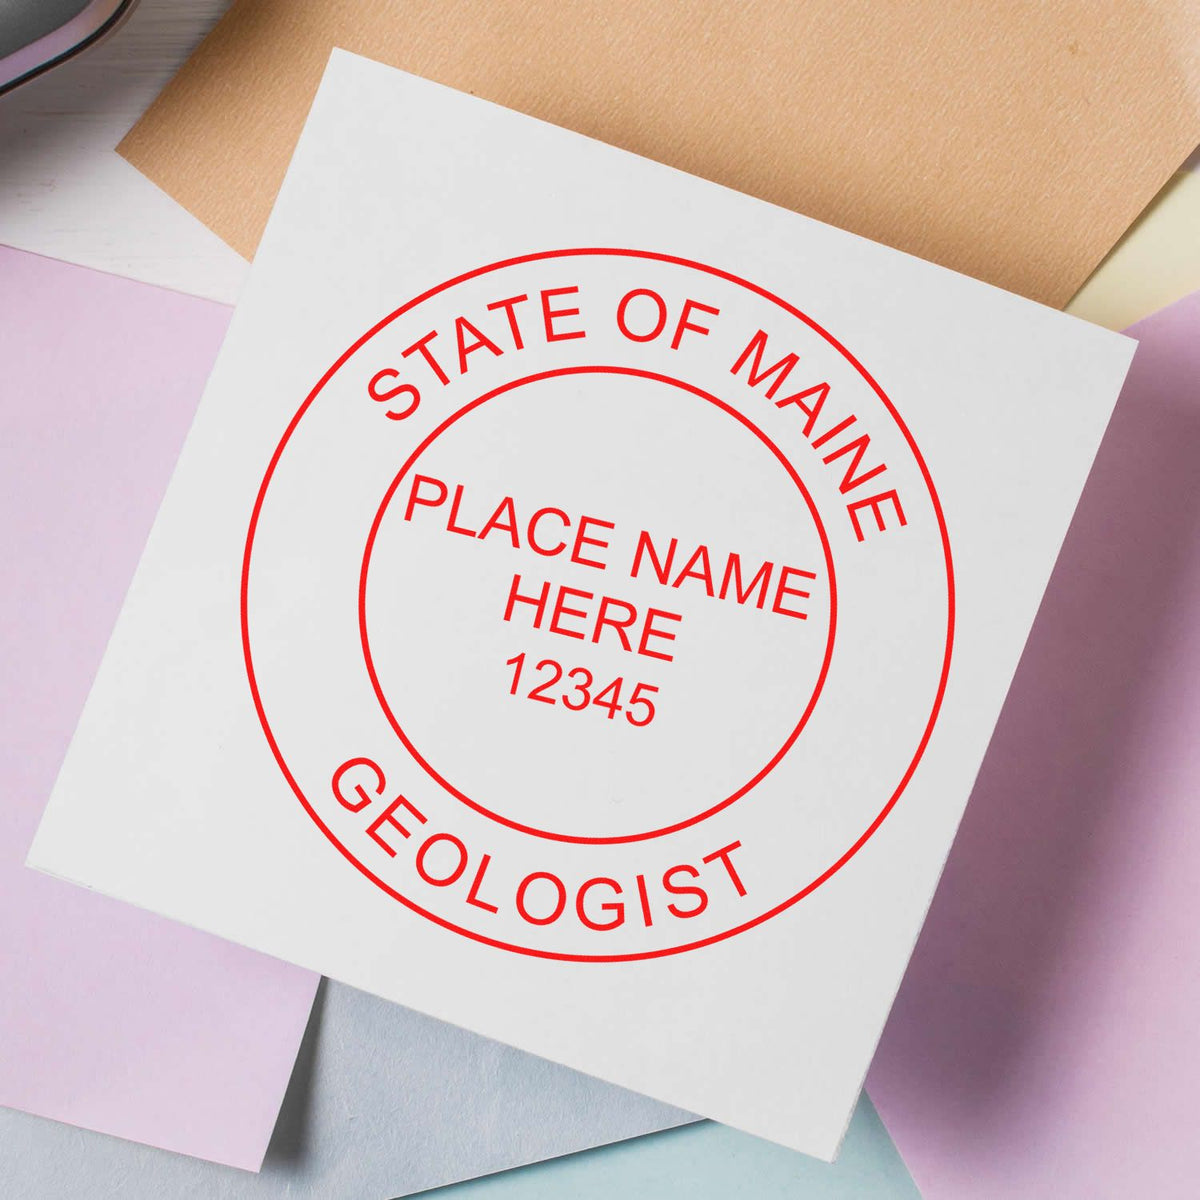 An in use photo of the Slim Pre-Inked Maine Professional Geologist Seal Stamp showing a sample imprint on a cardstock